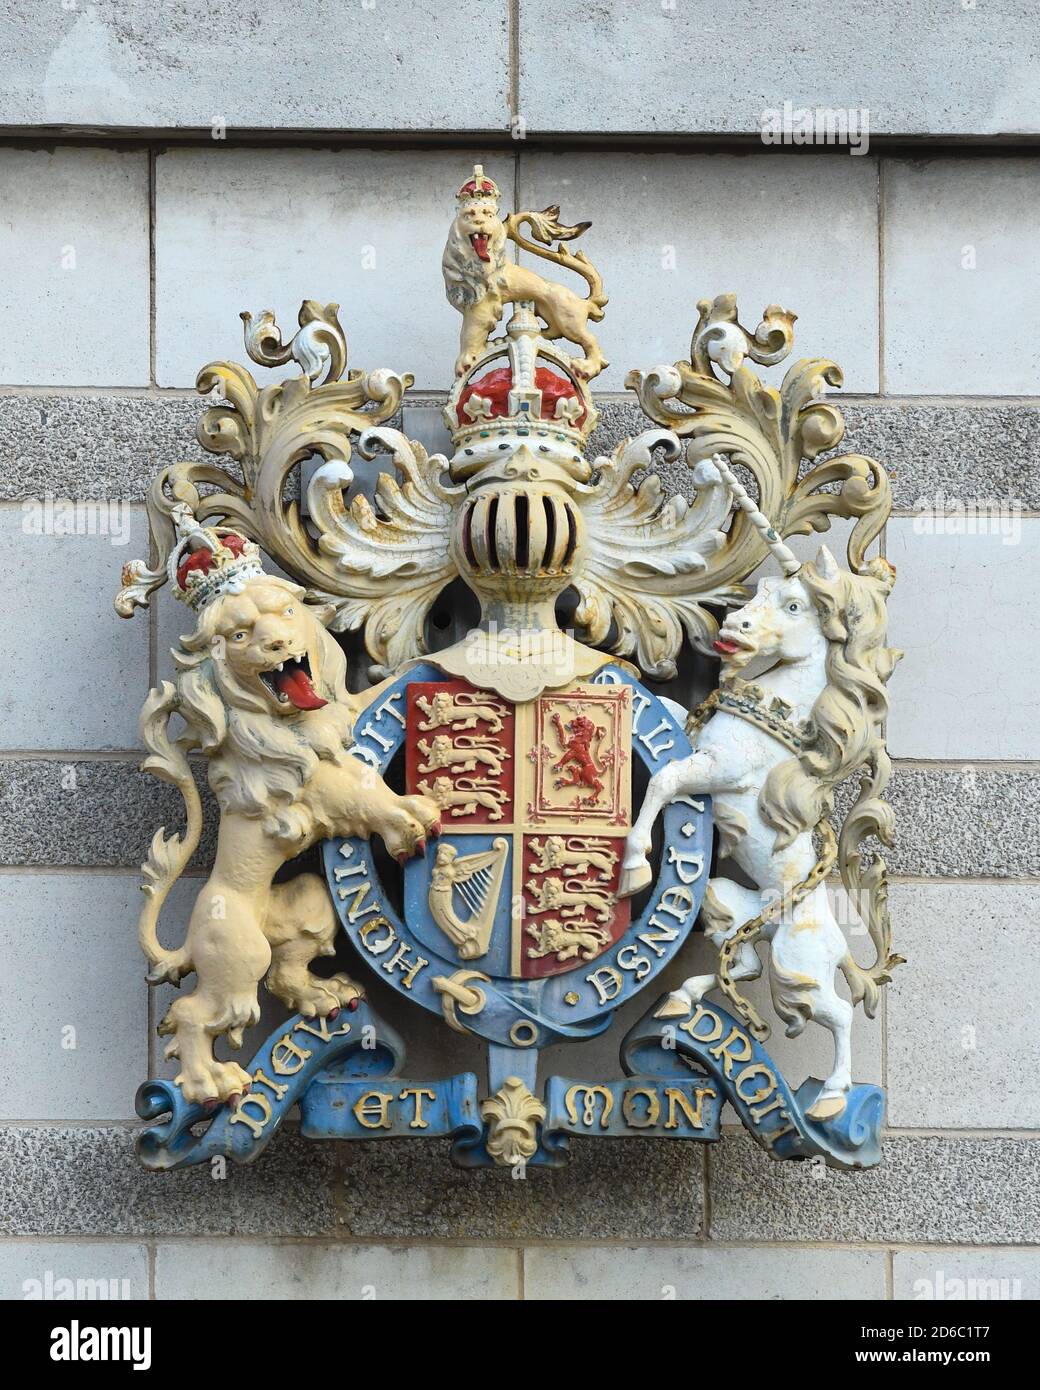 Royal Coat of Arms on wall of Doncaster Court Building, Doncaster, South Yorkshire, England, UK Stock Photo